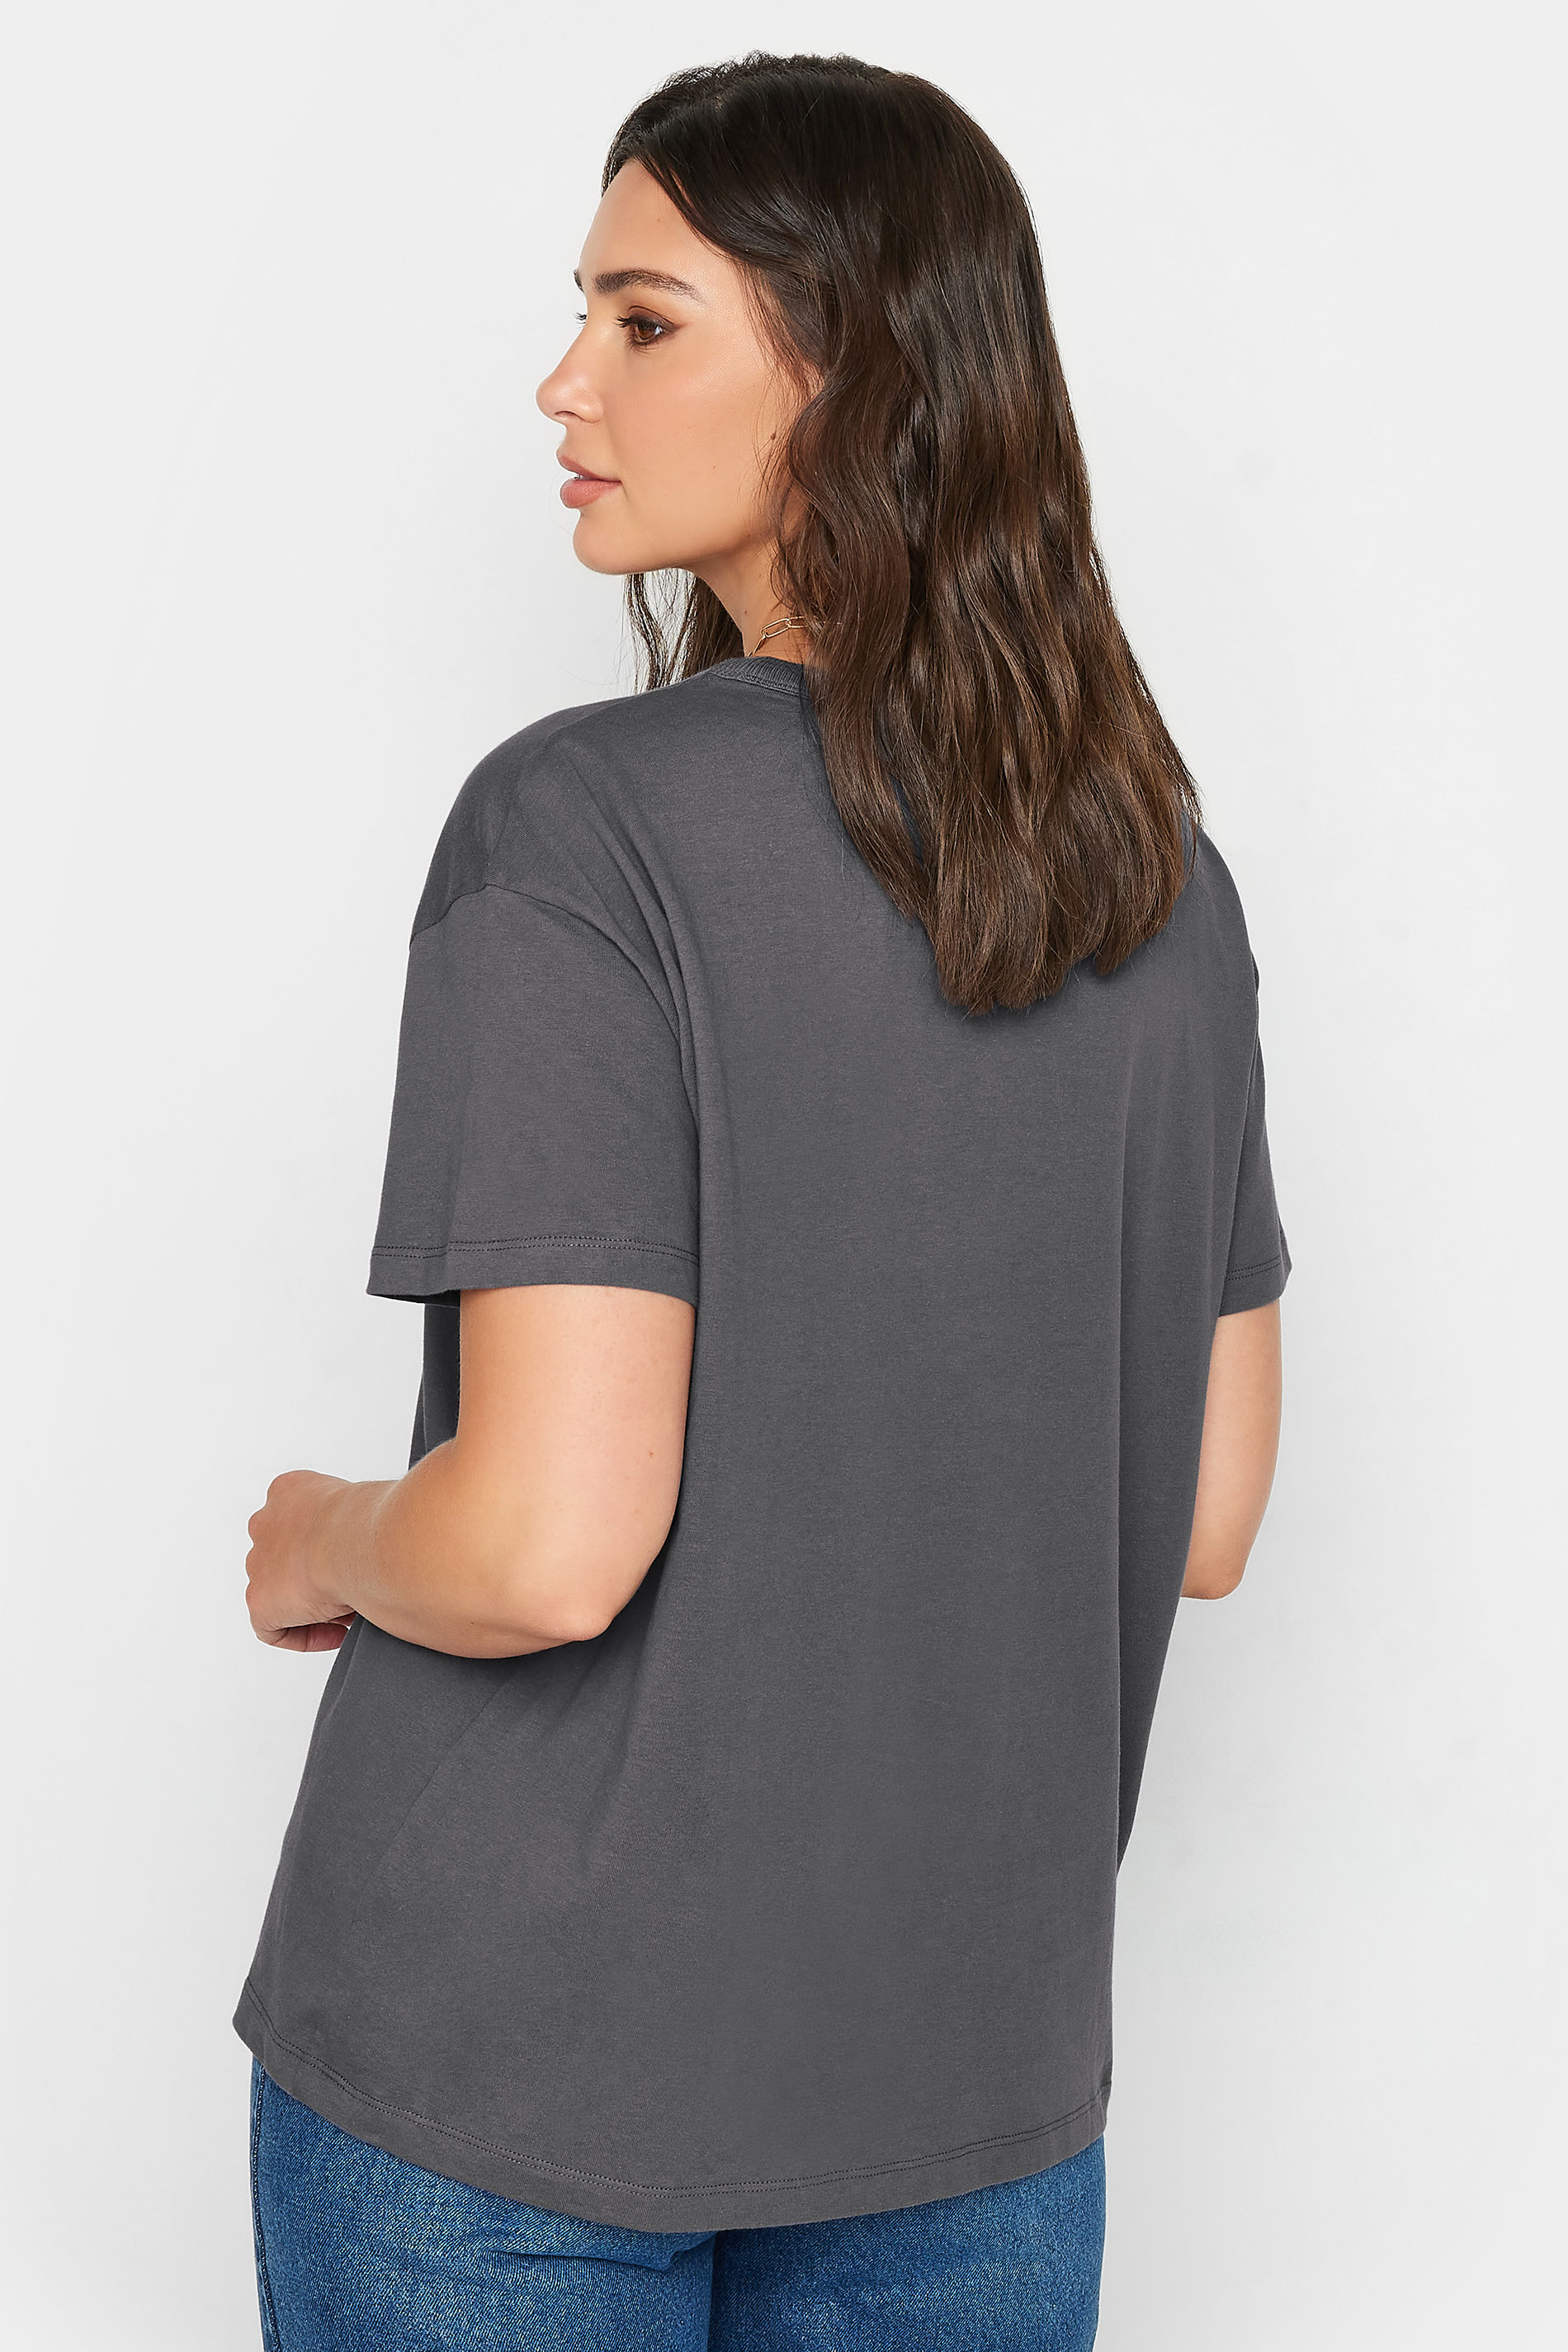 LTS Tall Charcoal Grey Short Sleeve T-Shirt | Yours Clothing  3